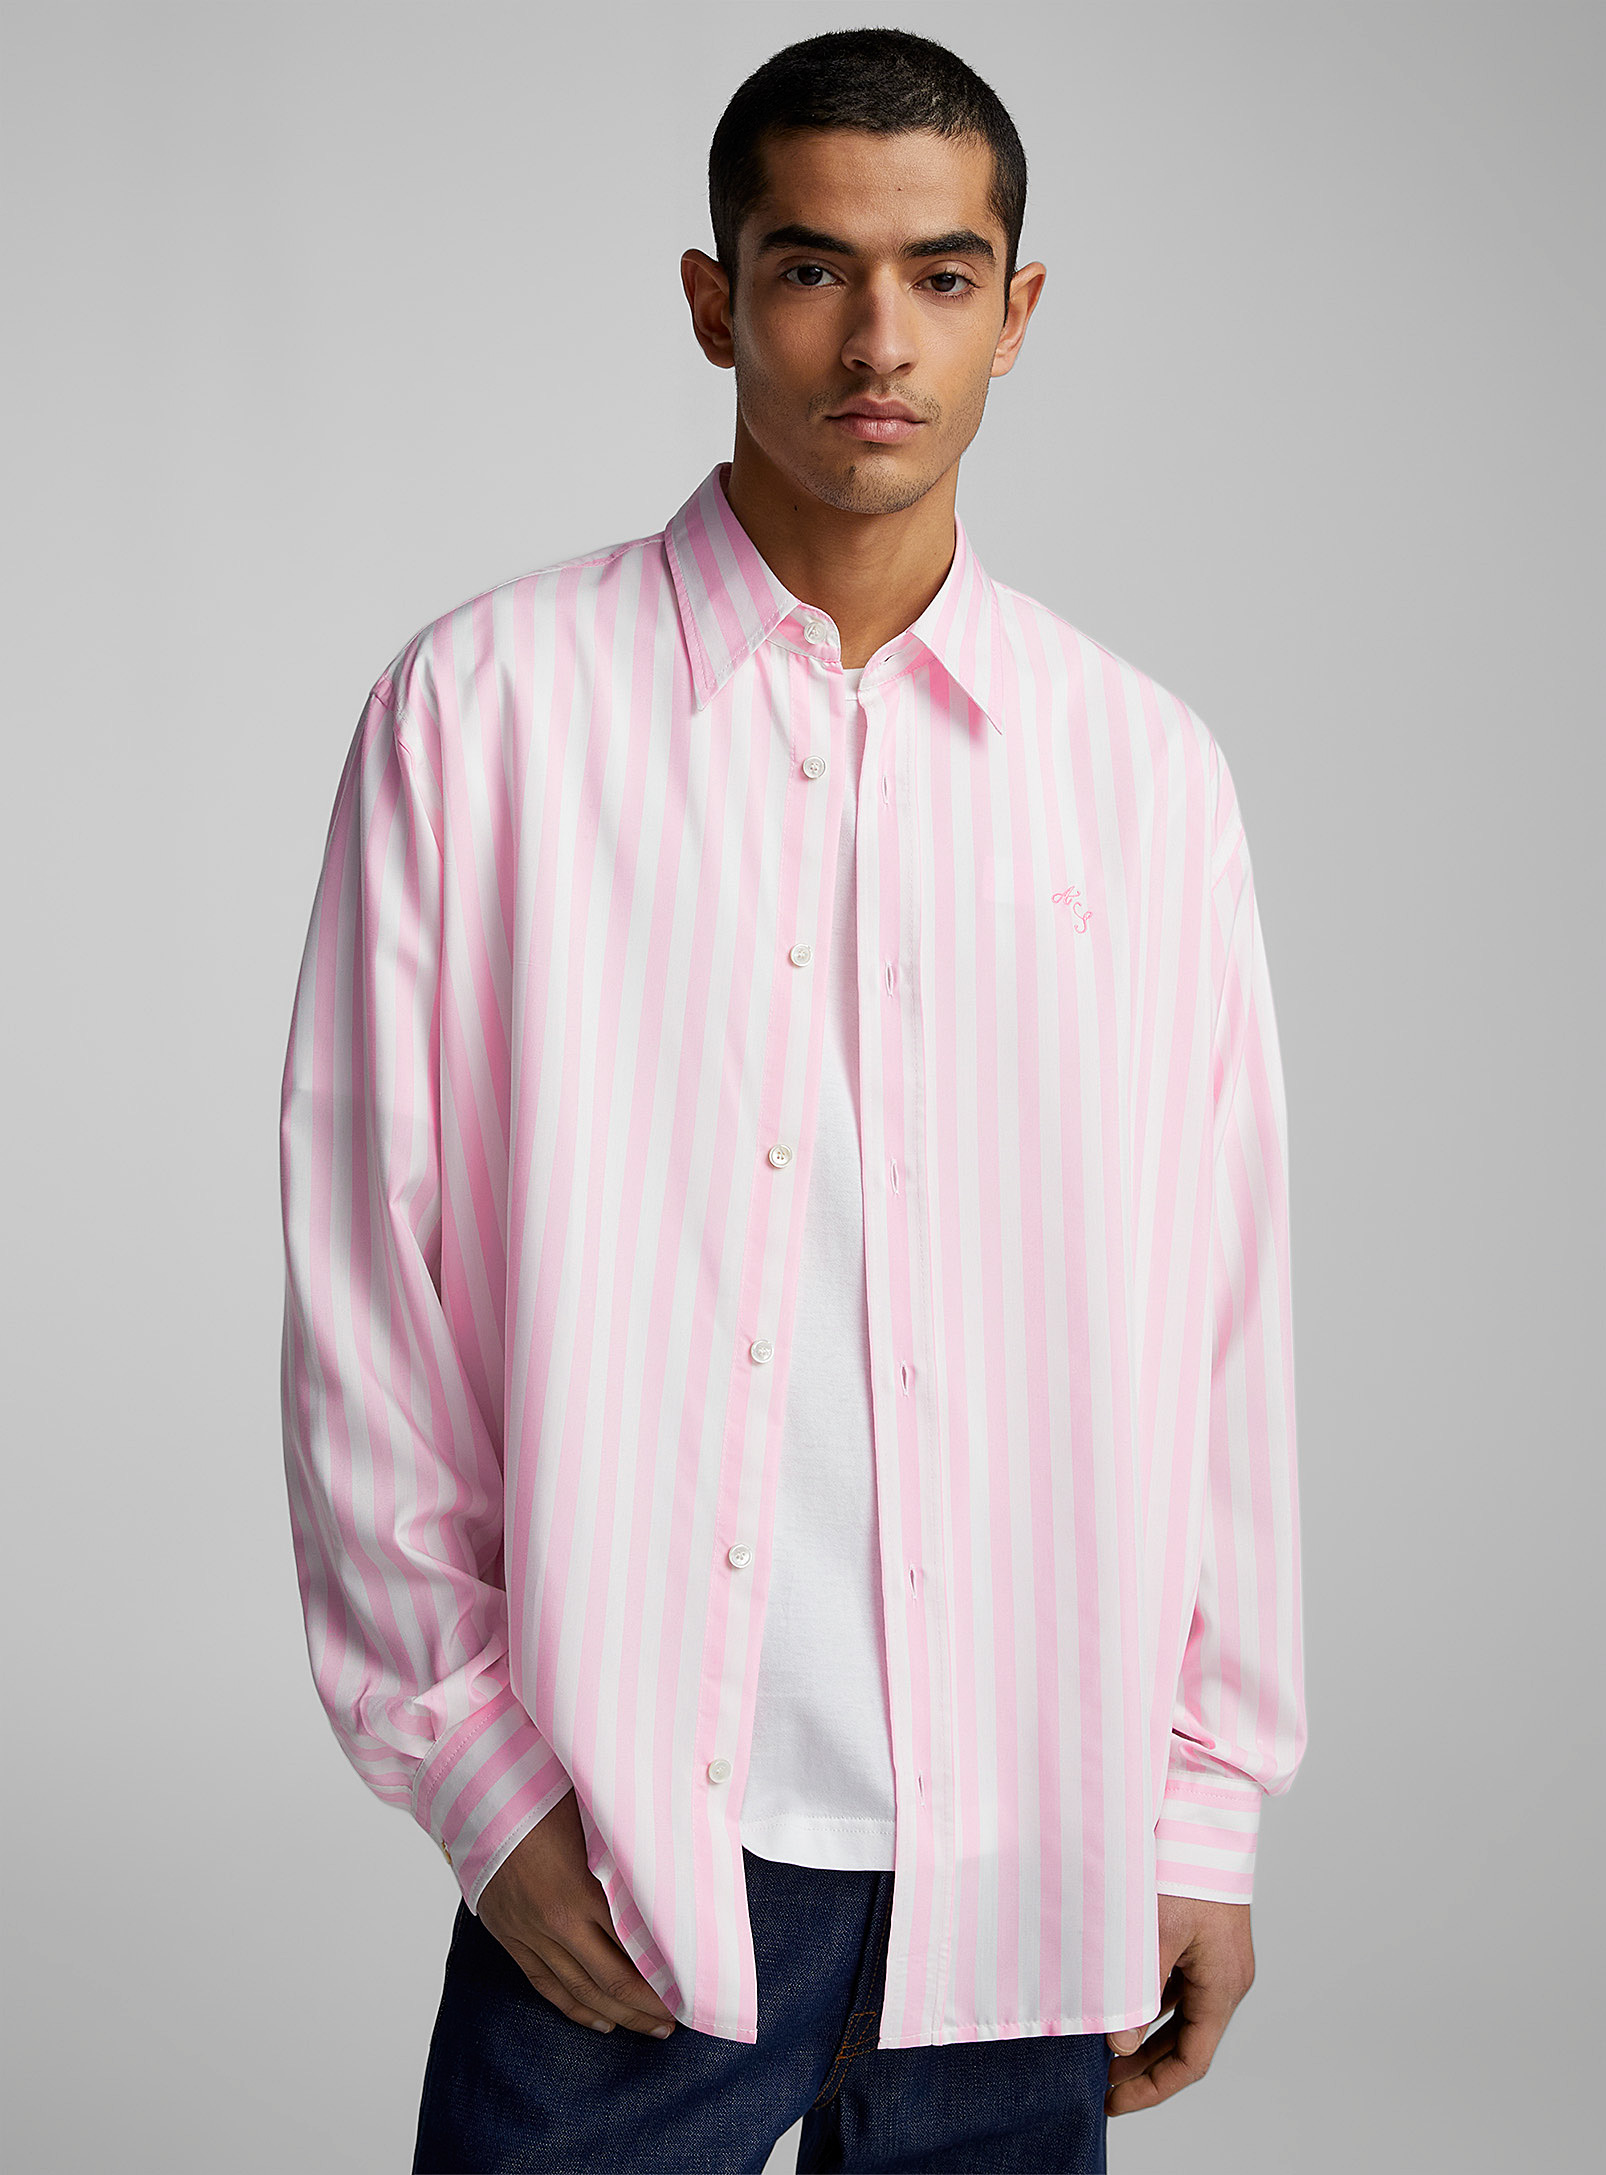 Acne Studios Rose Logo Lined Shirt In Patterned Red